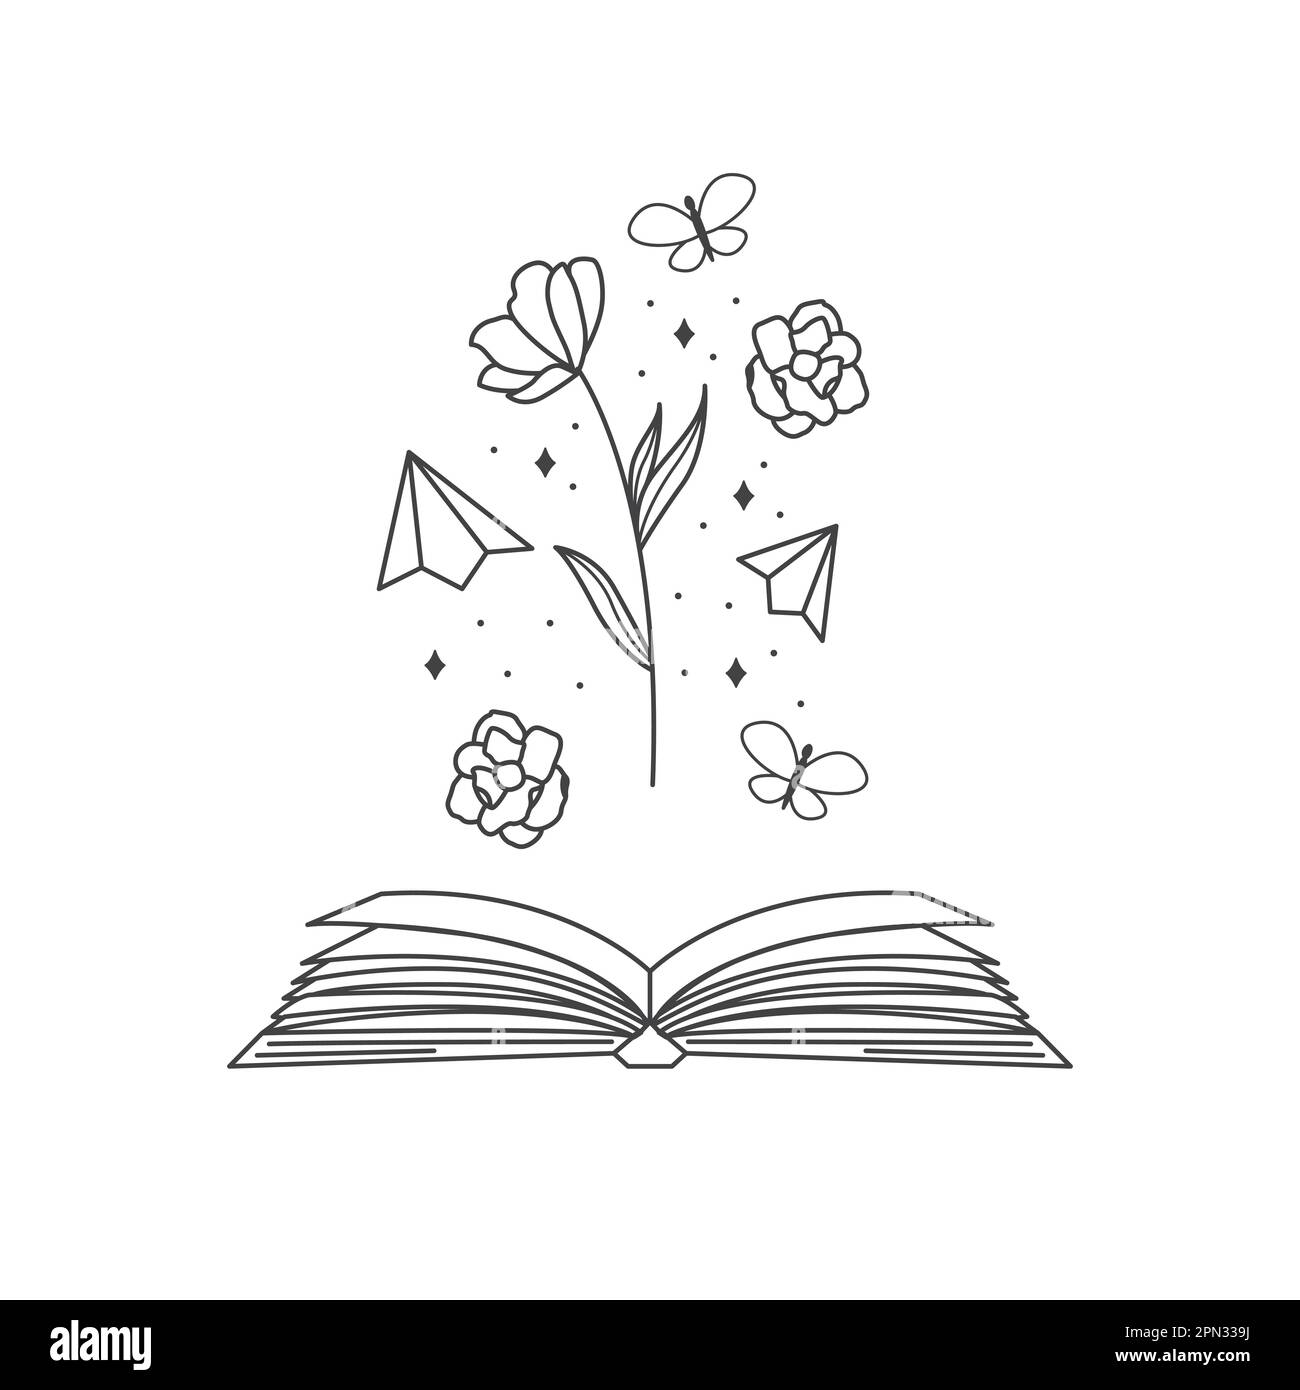 Magic book vector logo design. Open book with flowers, stars, butterfly ...